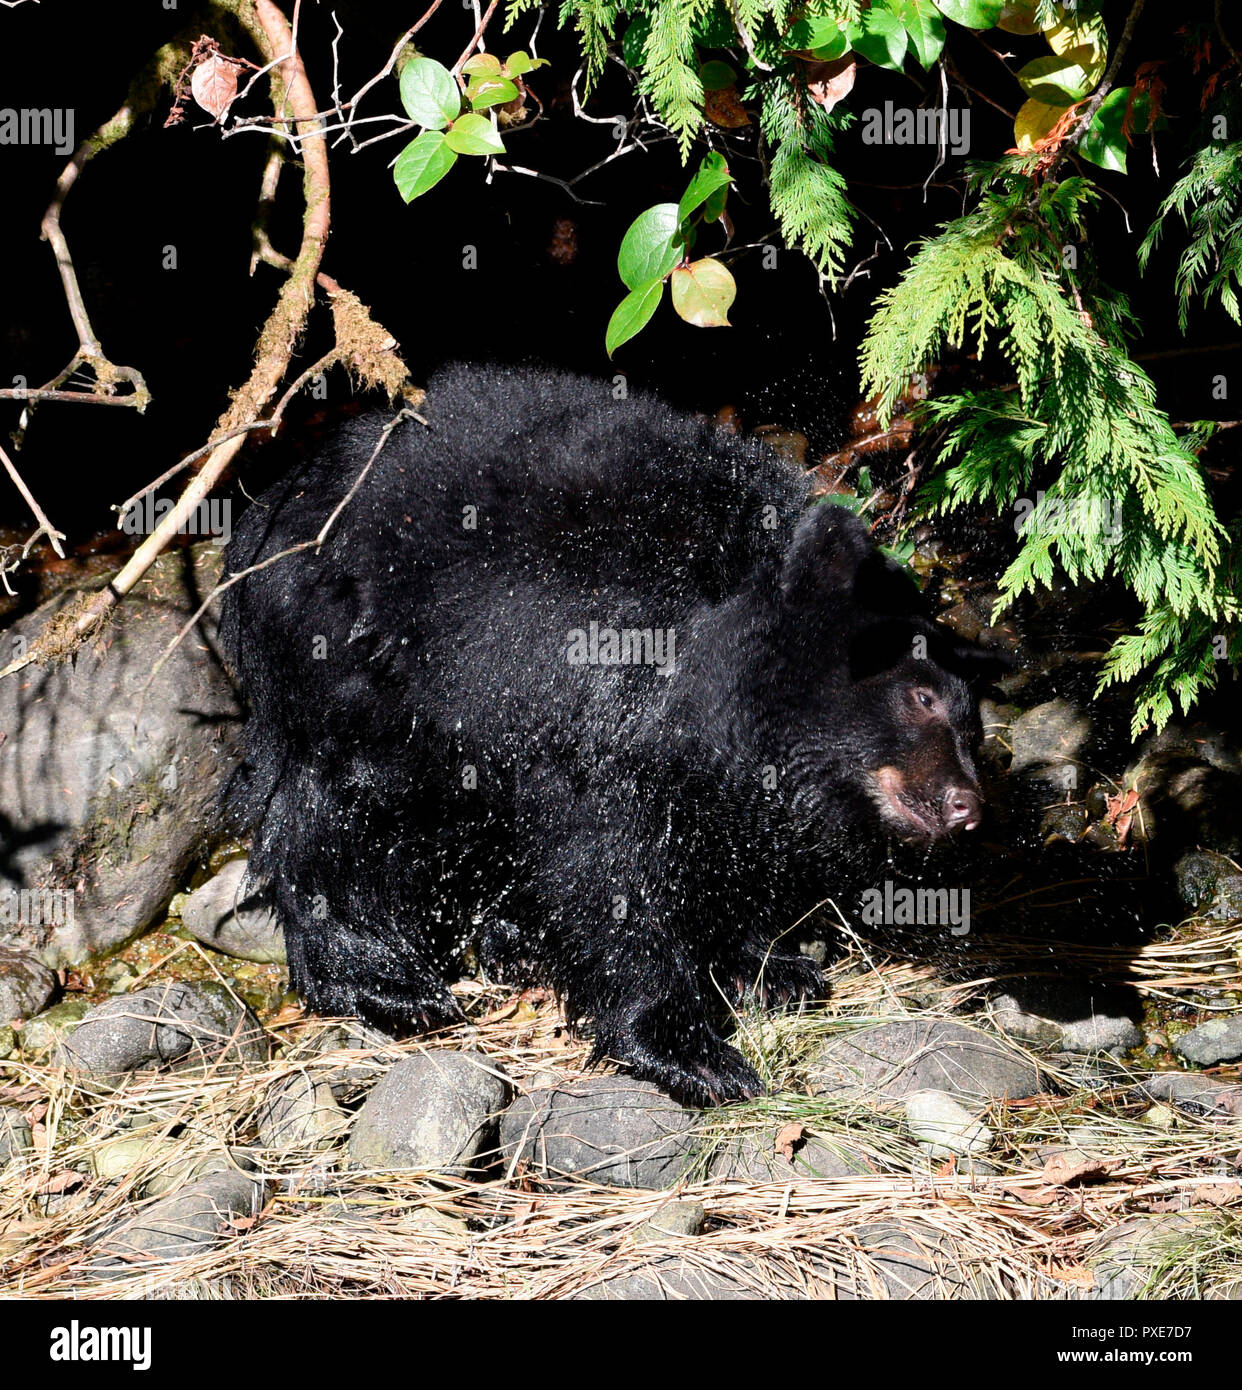 Ucluelet, Vancouver Island, Canada.  21st Oct 2018.  A black bear cub shakes water from its fur as it learns to fish for salmon. Black bears are preparing to hibernate for winter, and this cub will be facing its first winter. Credit: Glyn Thomas/Alamy Live News Stock Photo